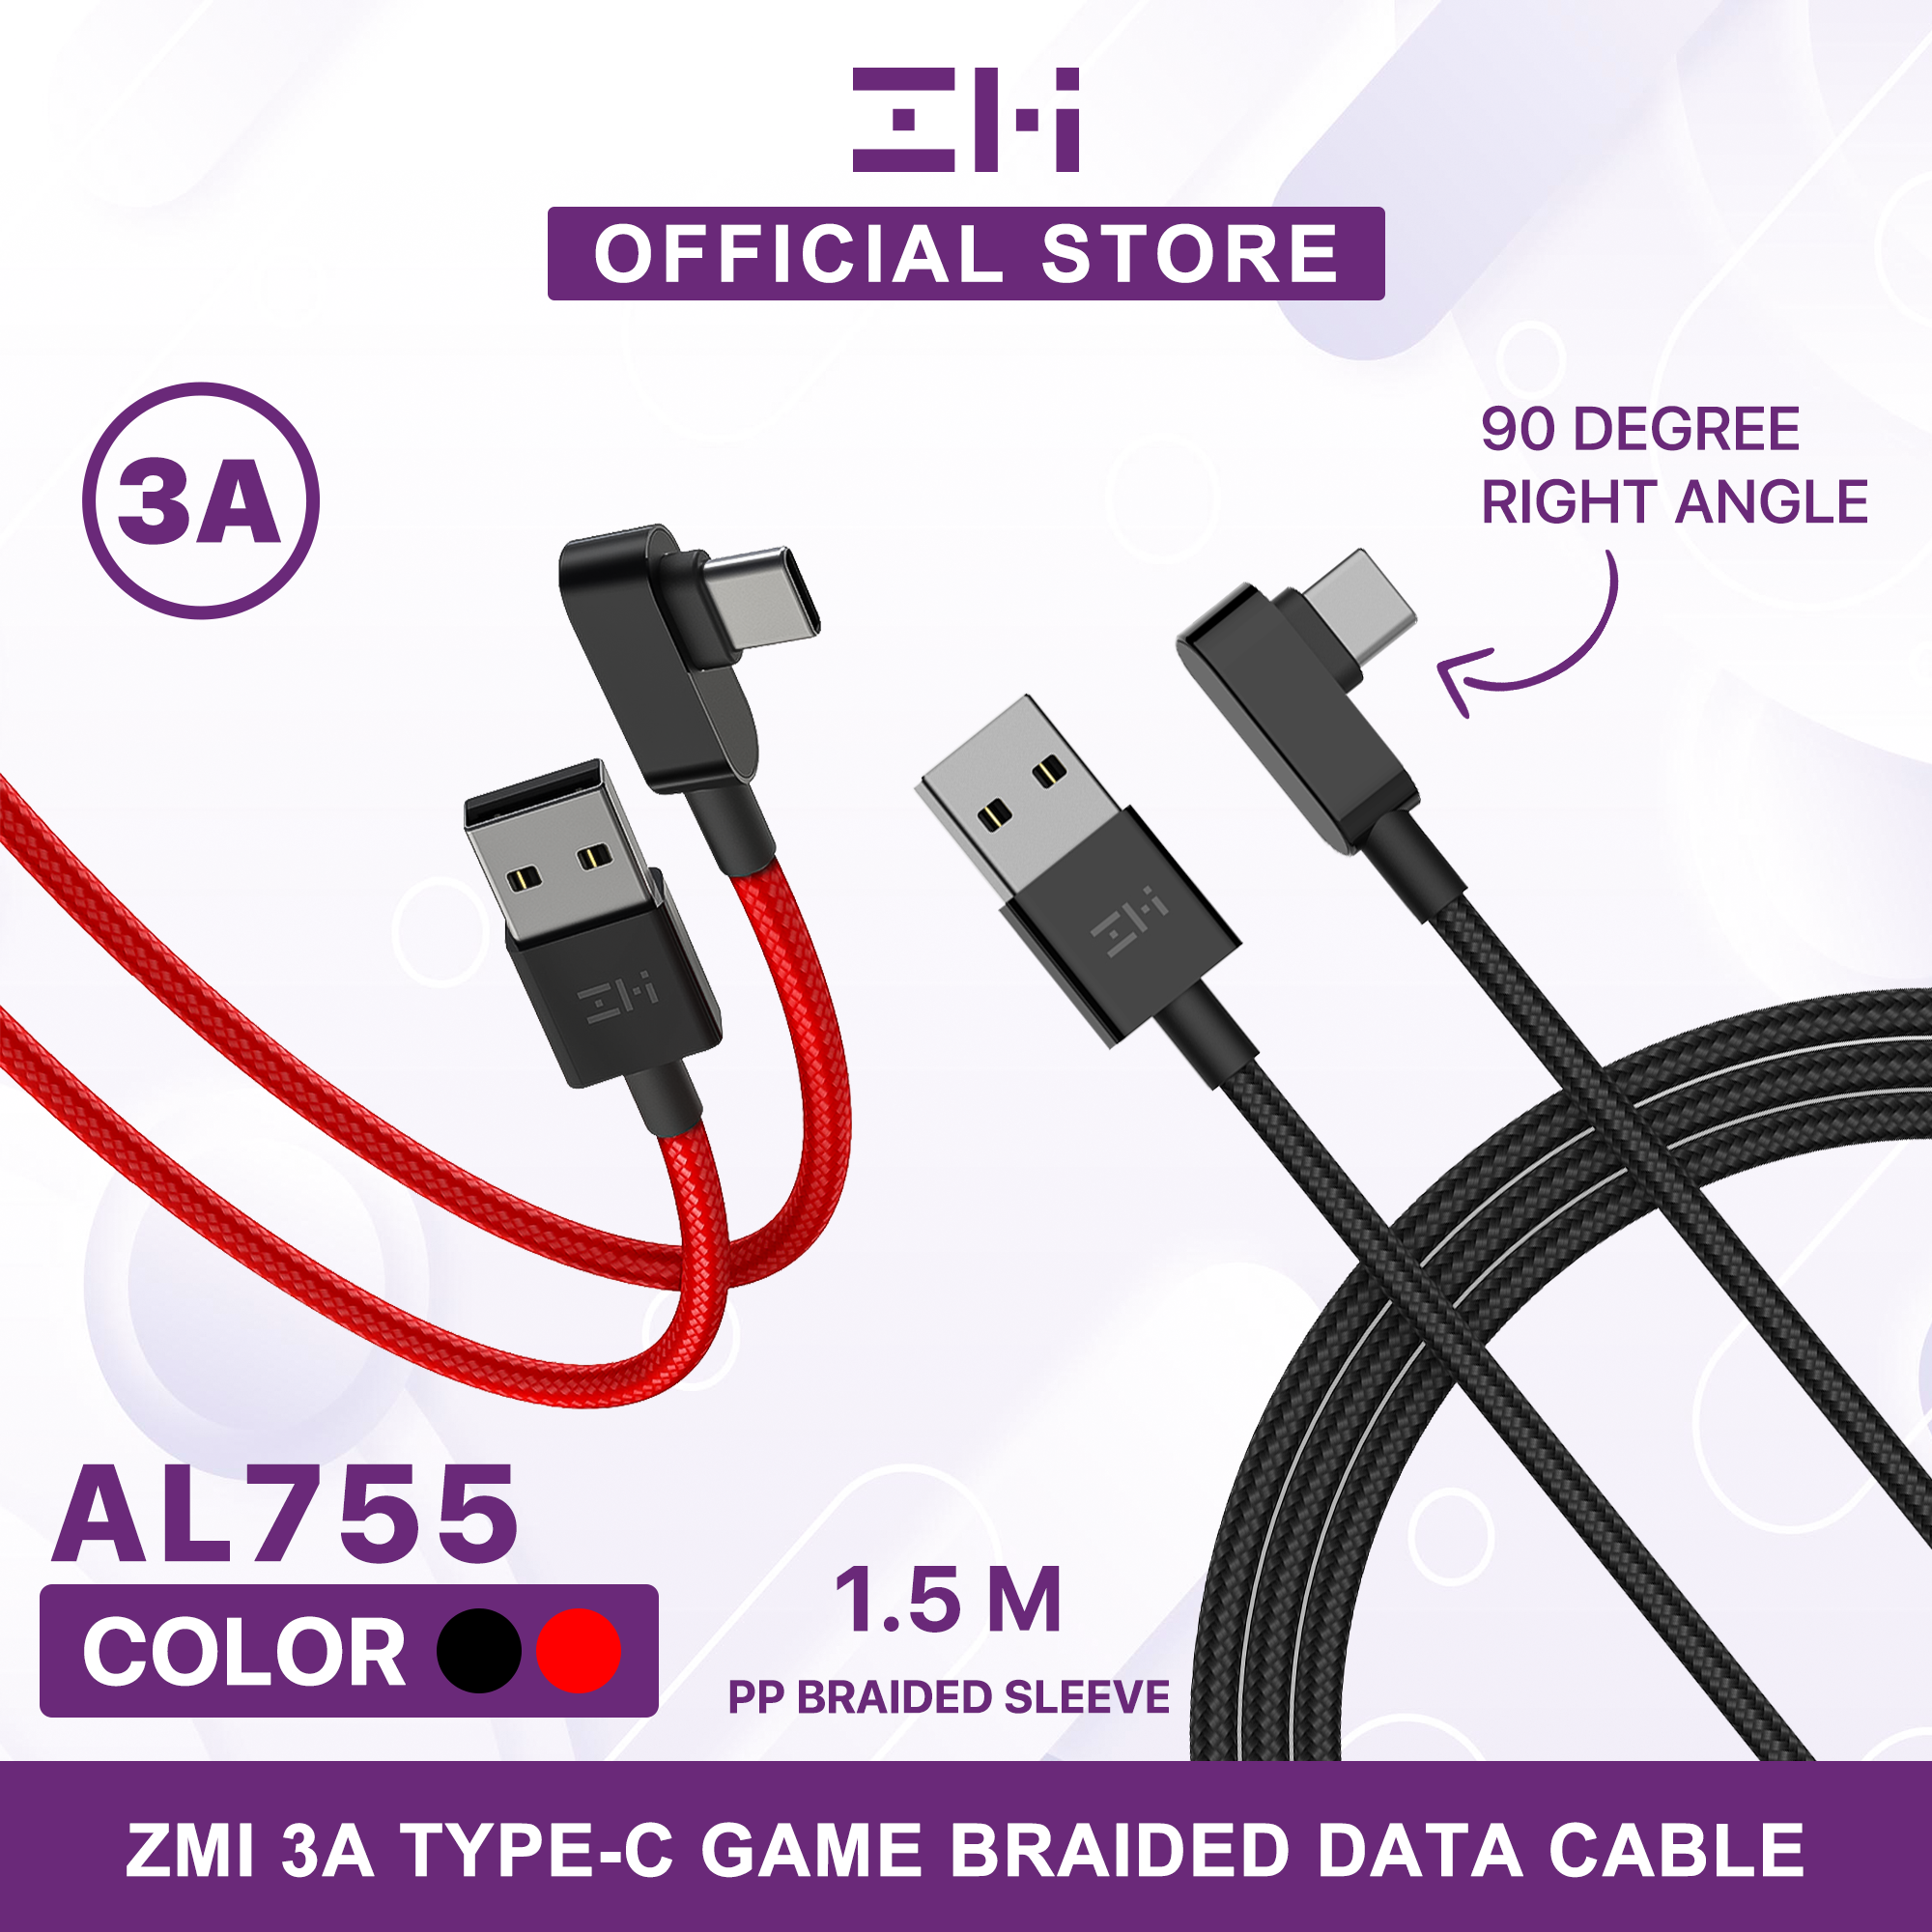 ZMI AL755 USB-A to USB-C CABLE 3A FAST CHARGING TYPE-C BRAIDED CABLE FOR PLAYING GAME 1.5M, Gaming Cable, Type C cable - RED